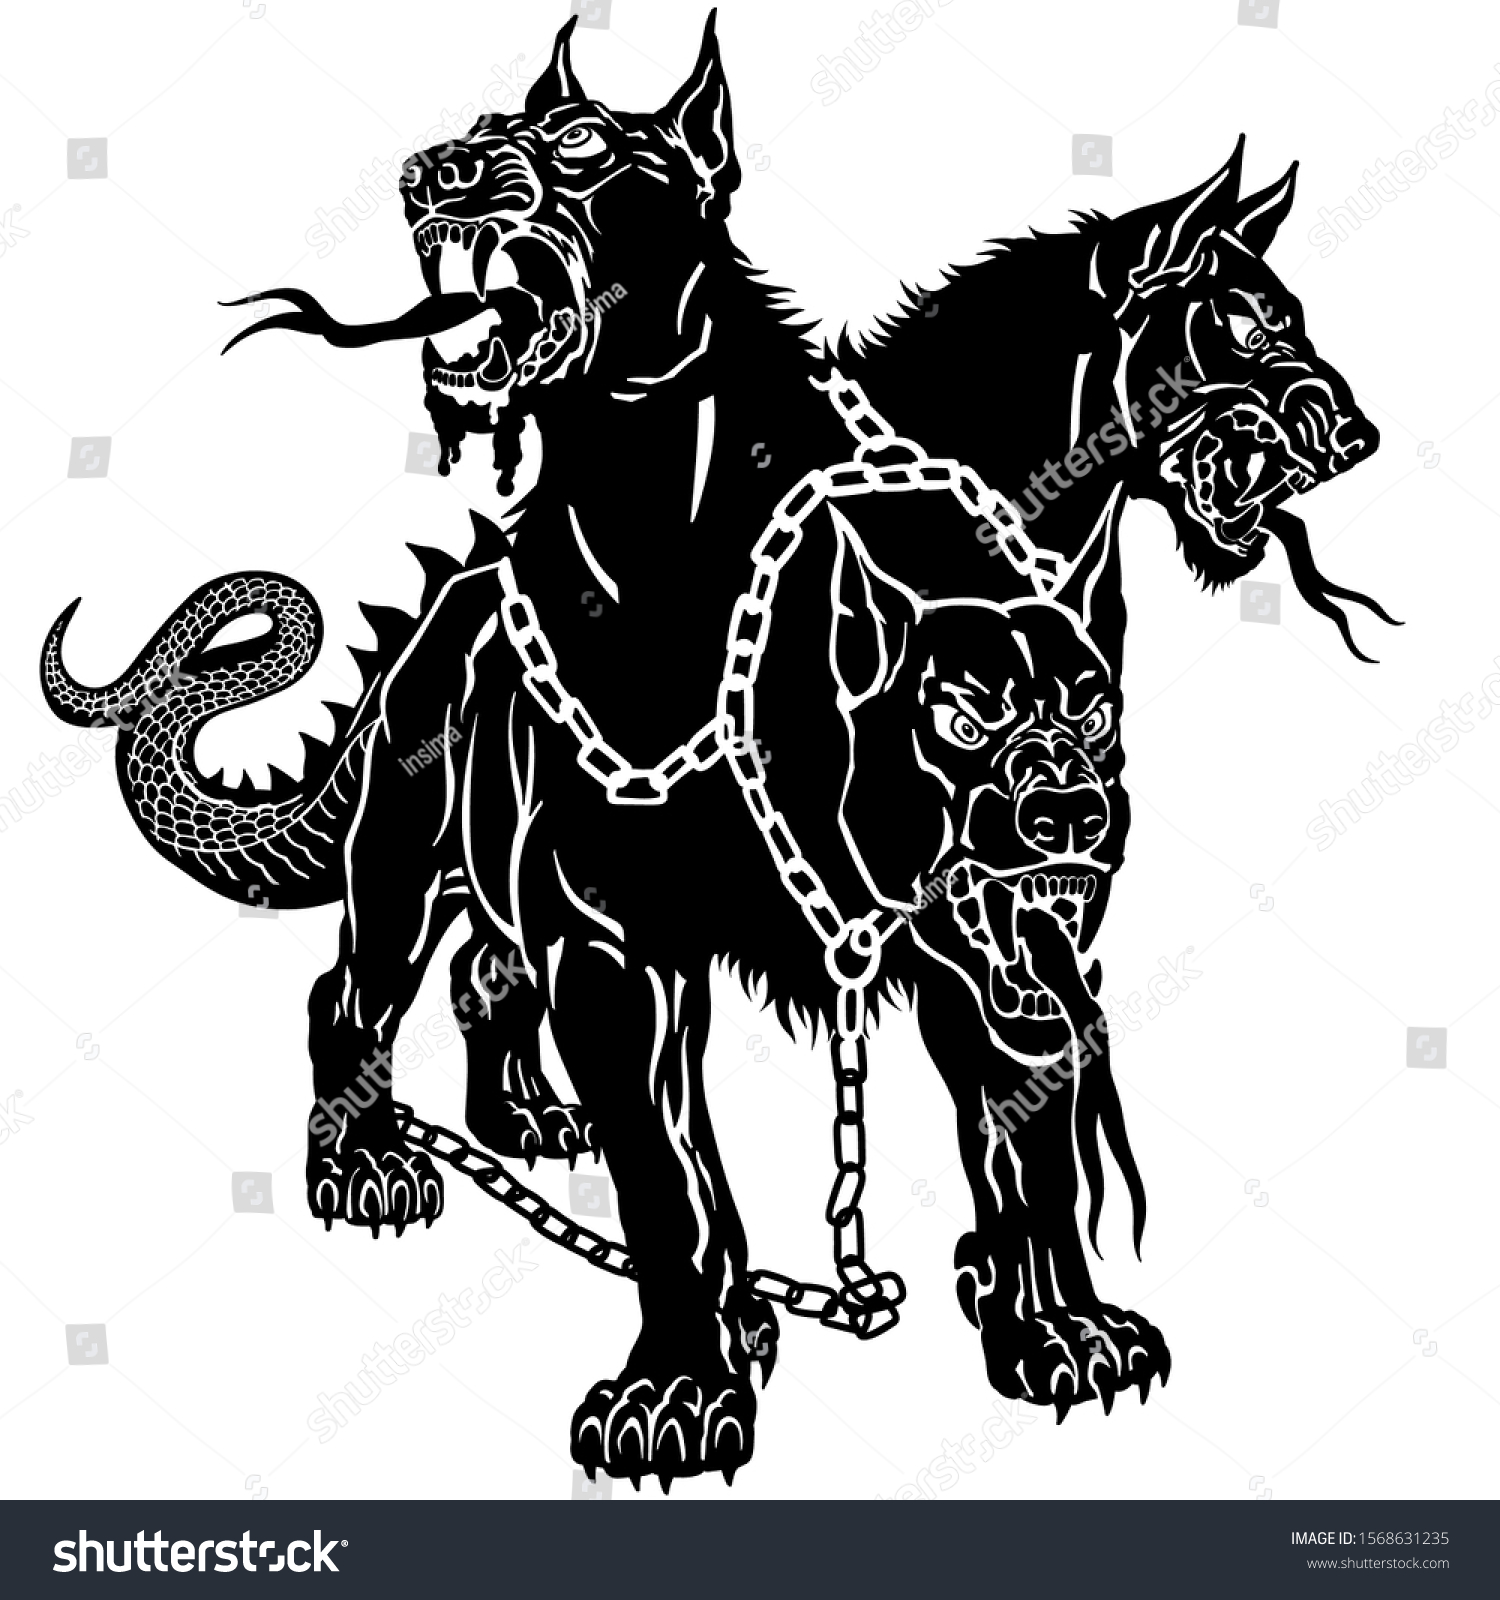 SVG of Cerberus hellhound Mythological three headed dog the guard of entrance to hell. Hound of Hades. Isolated tattoo style black and white vector illustration svg